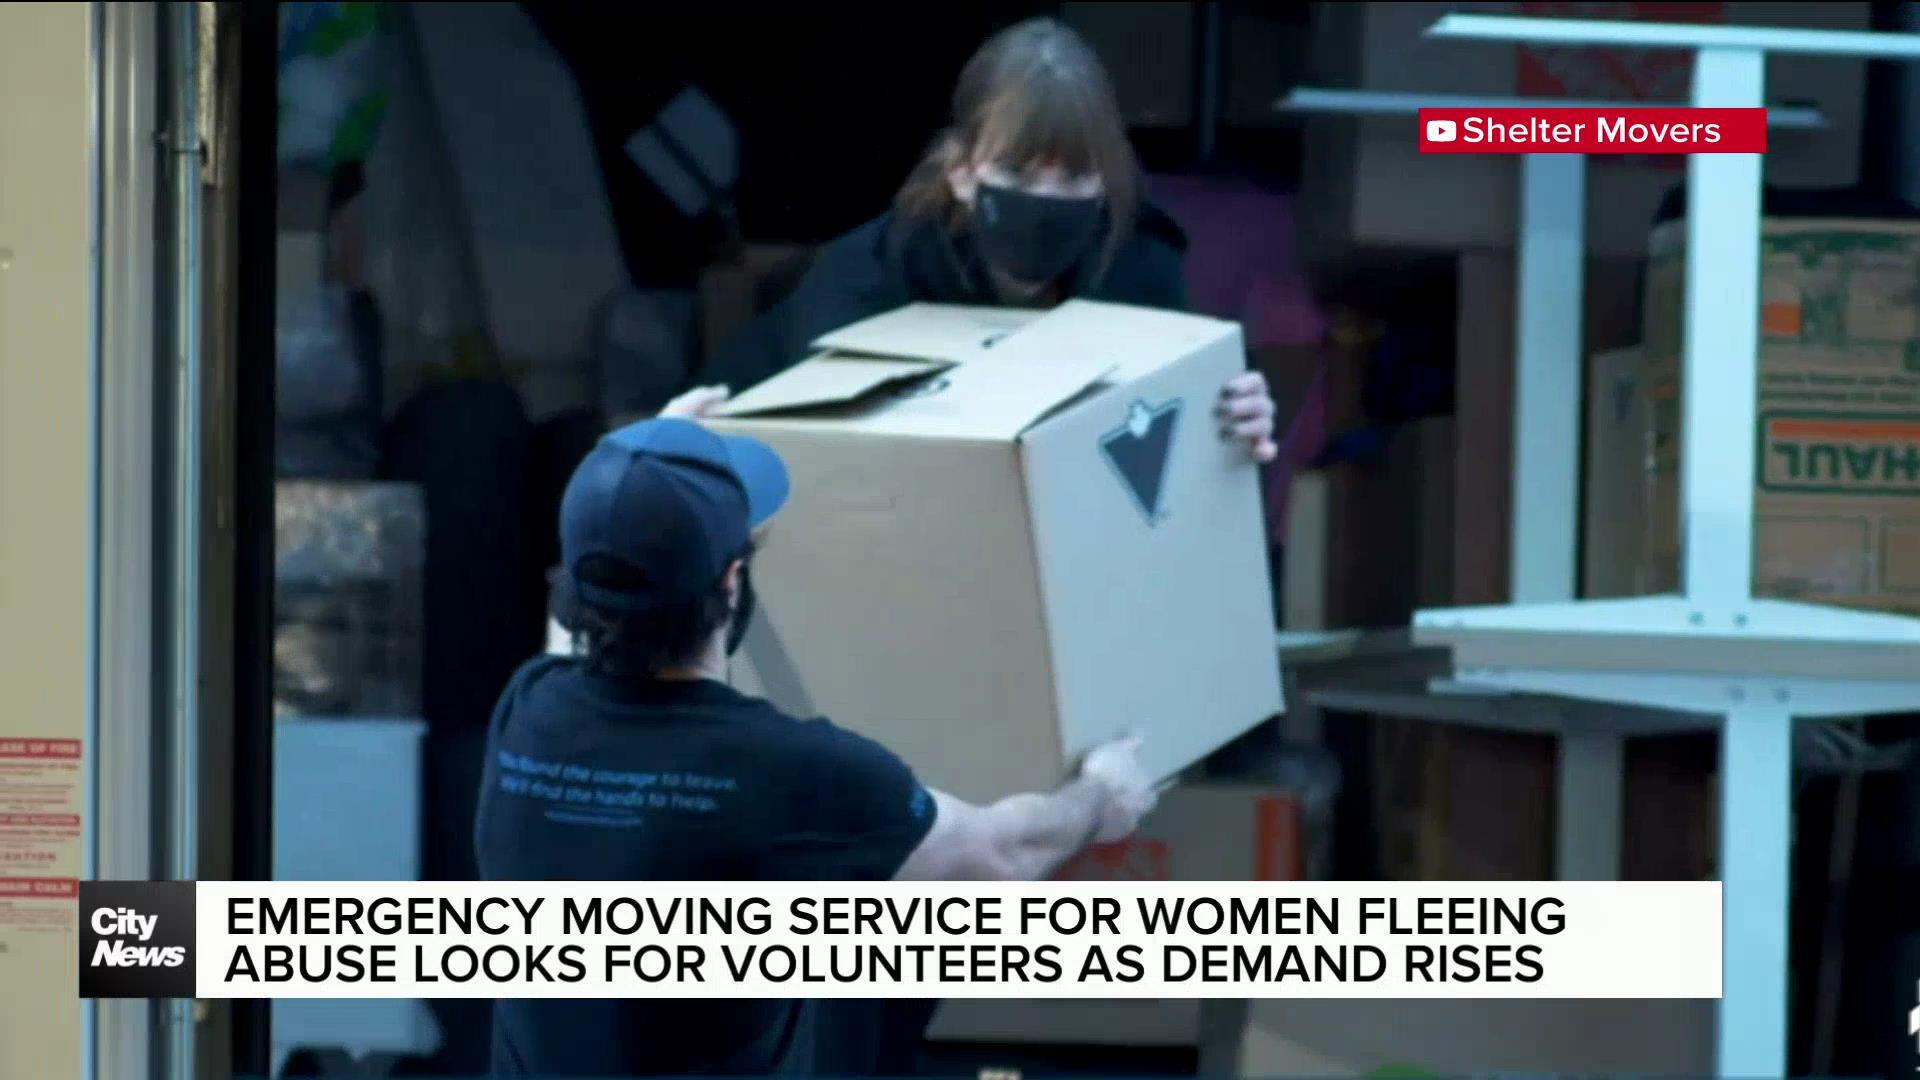 Emergency moving service in Montreal looking for volunteers